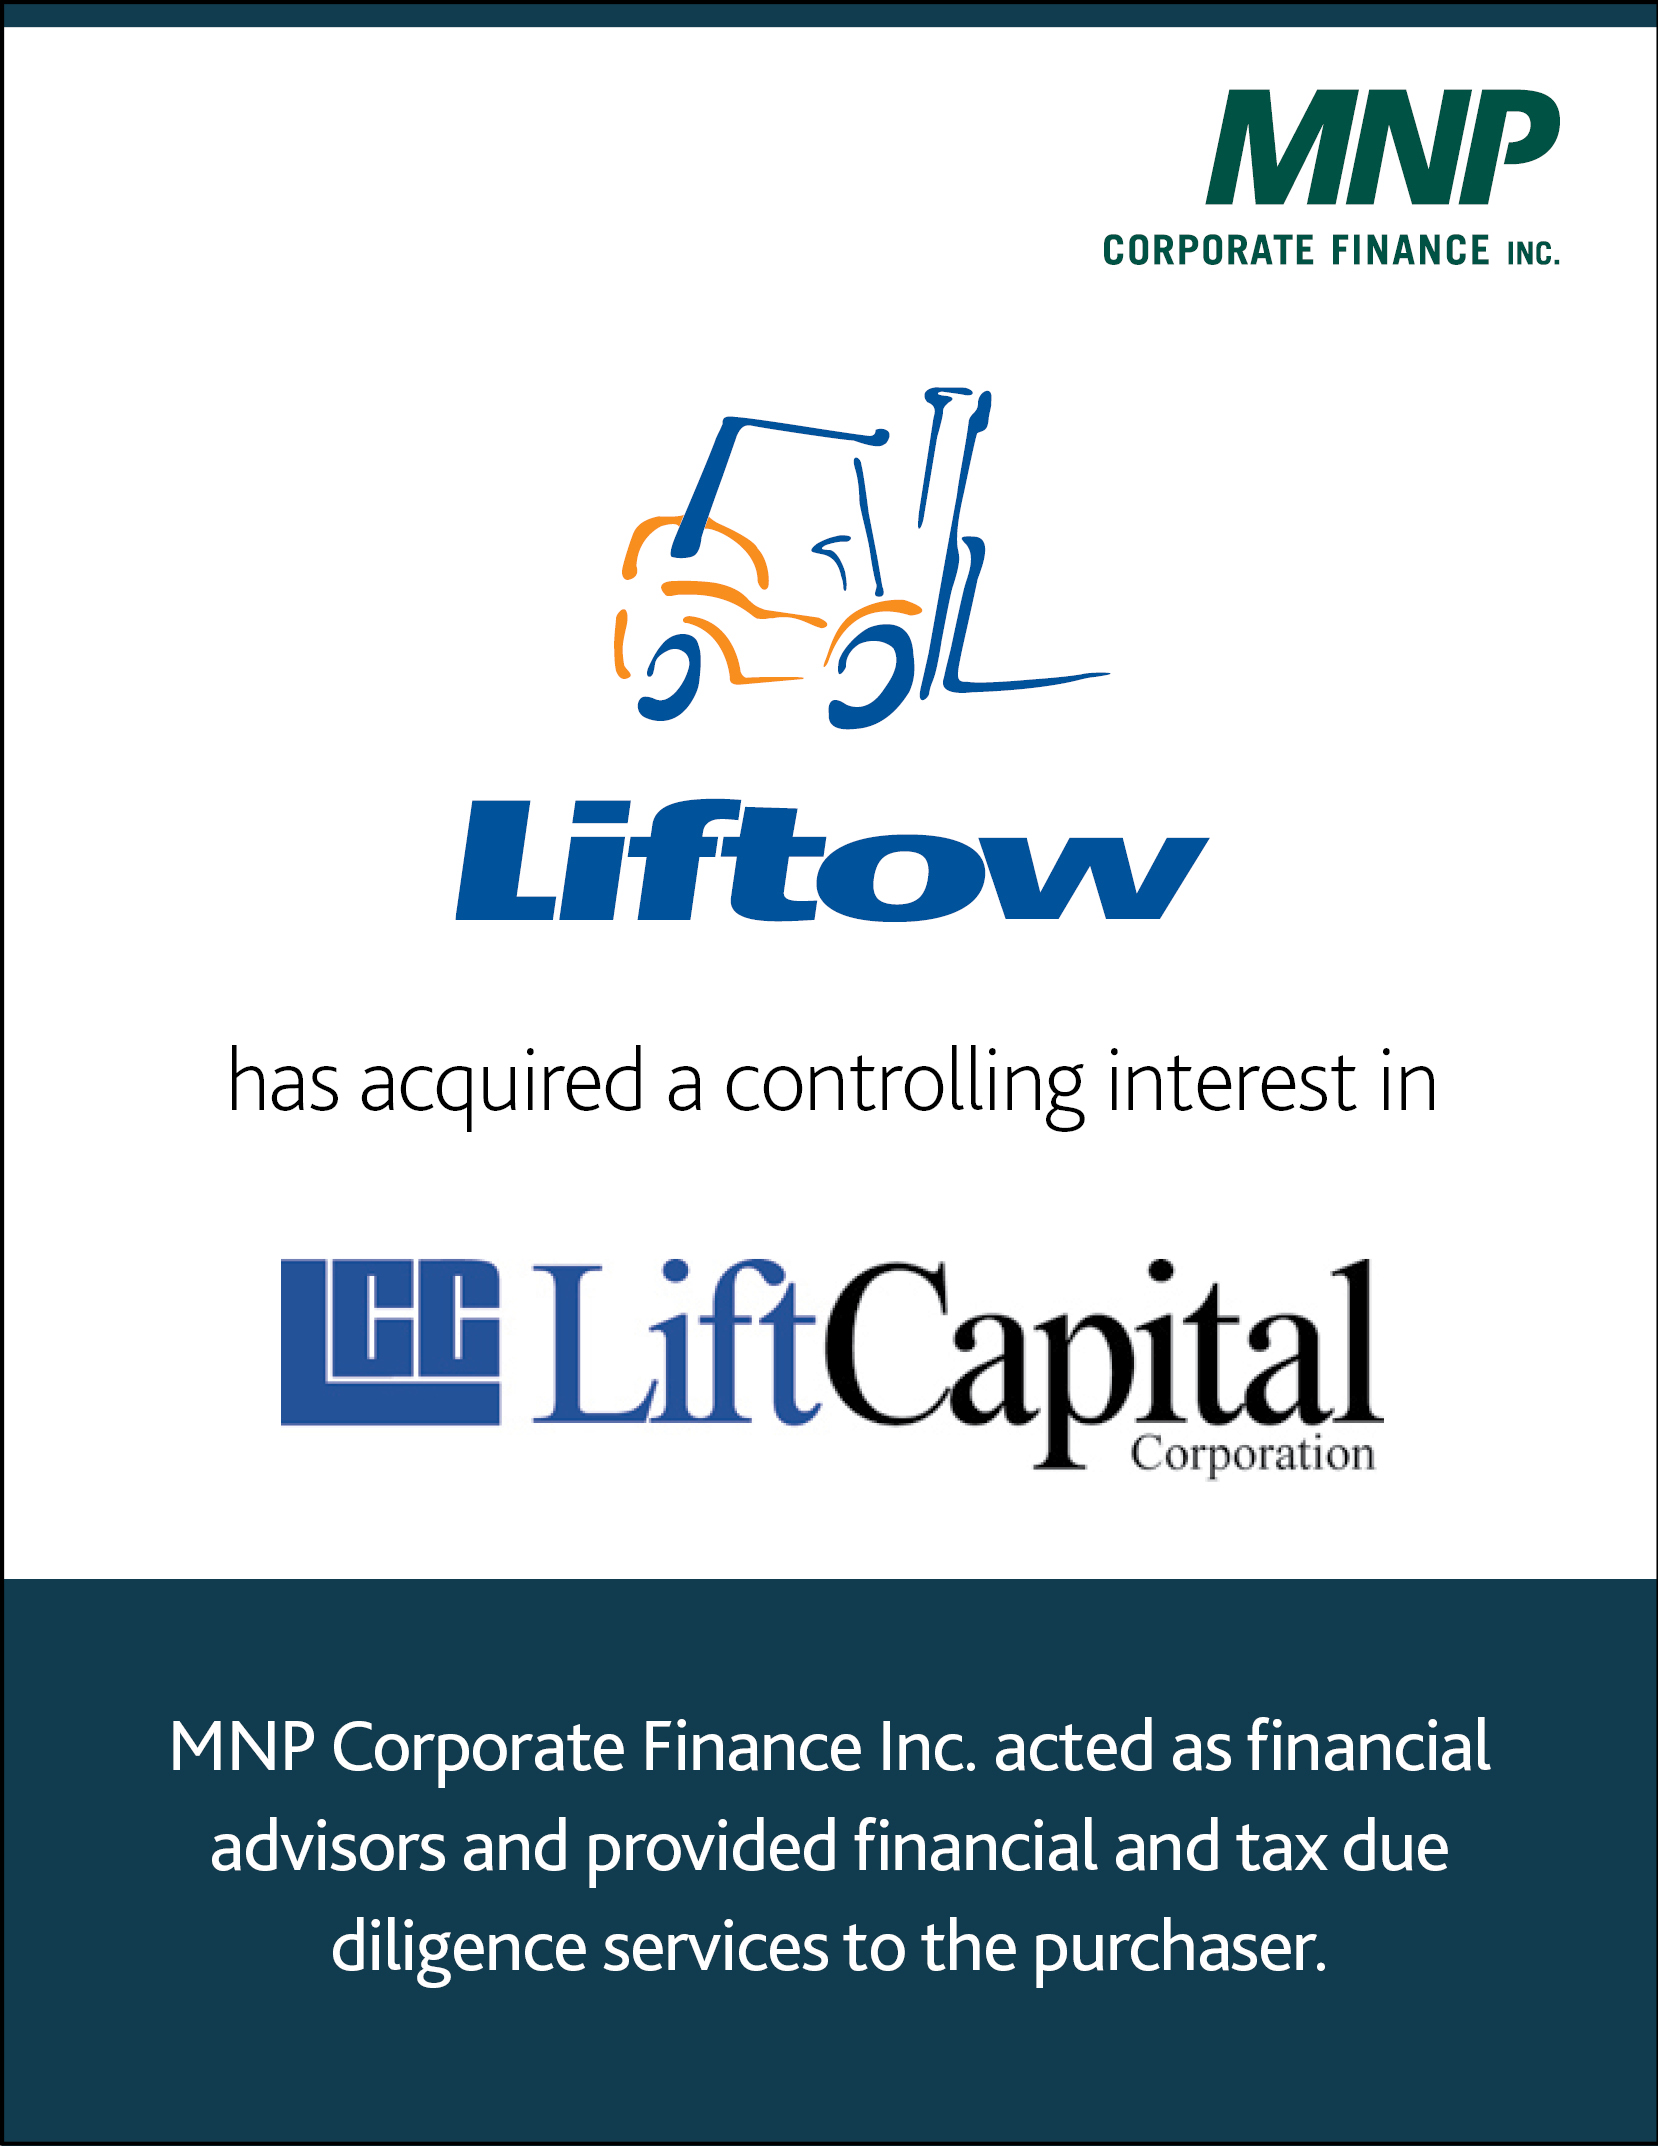 Liftow has acquired a controlling interest in LiftCapital Corporation